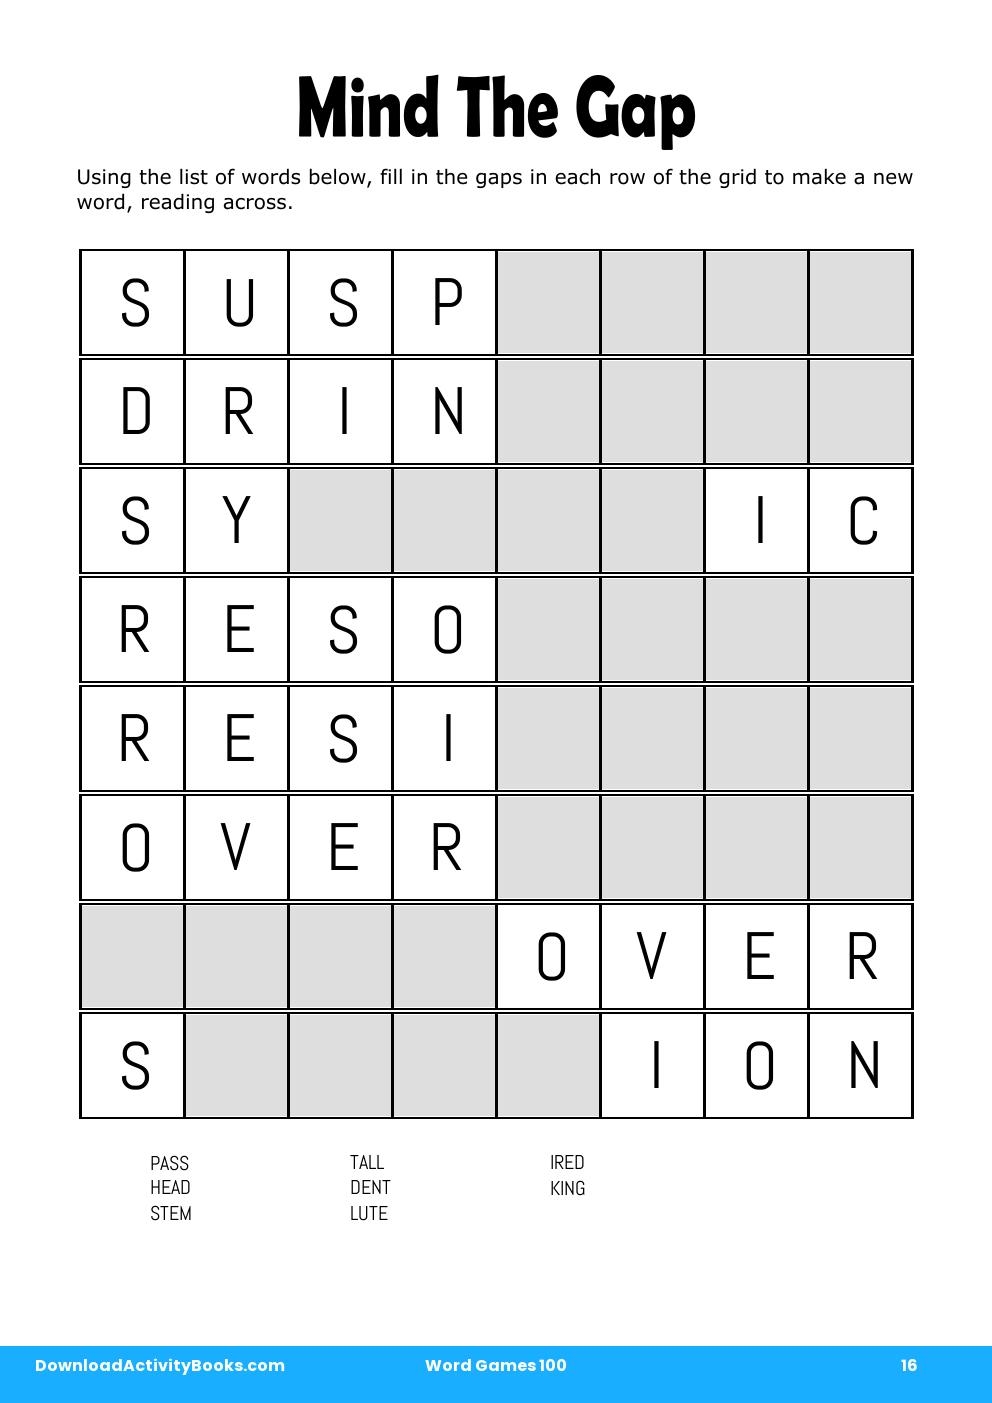 Mind The Gap in Word Games 100